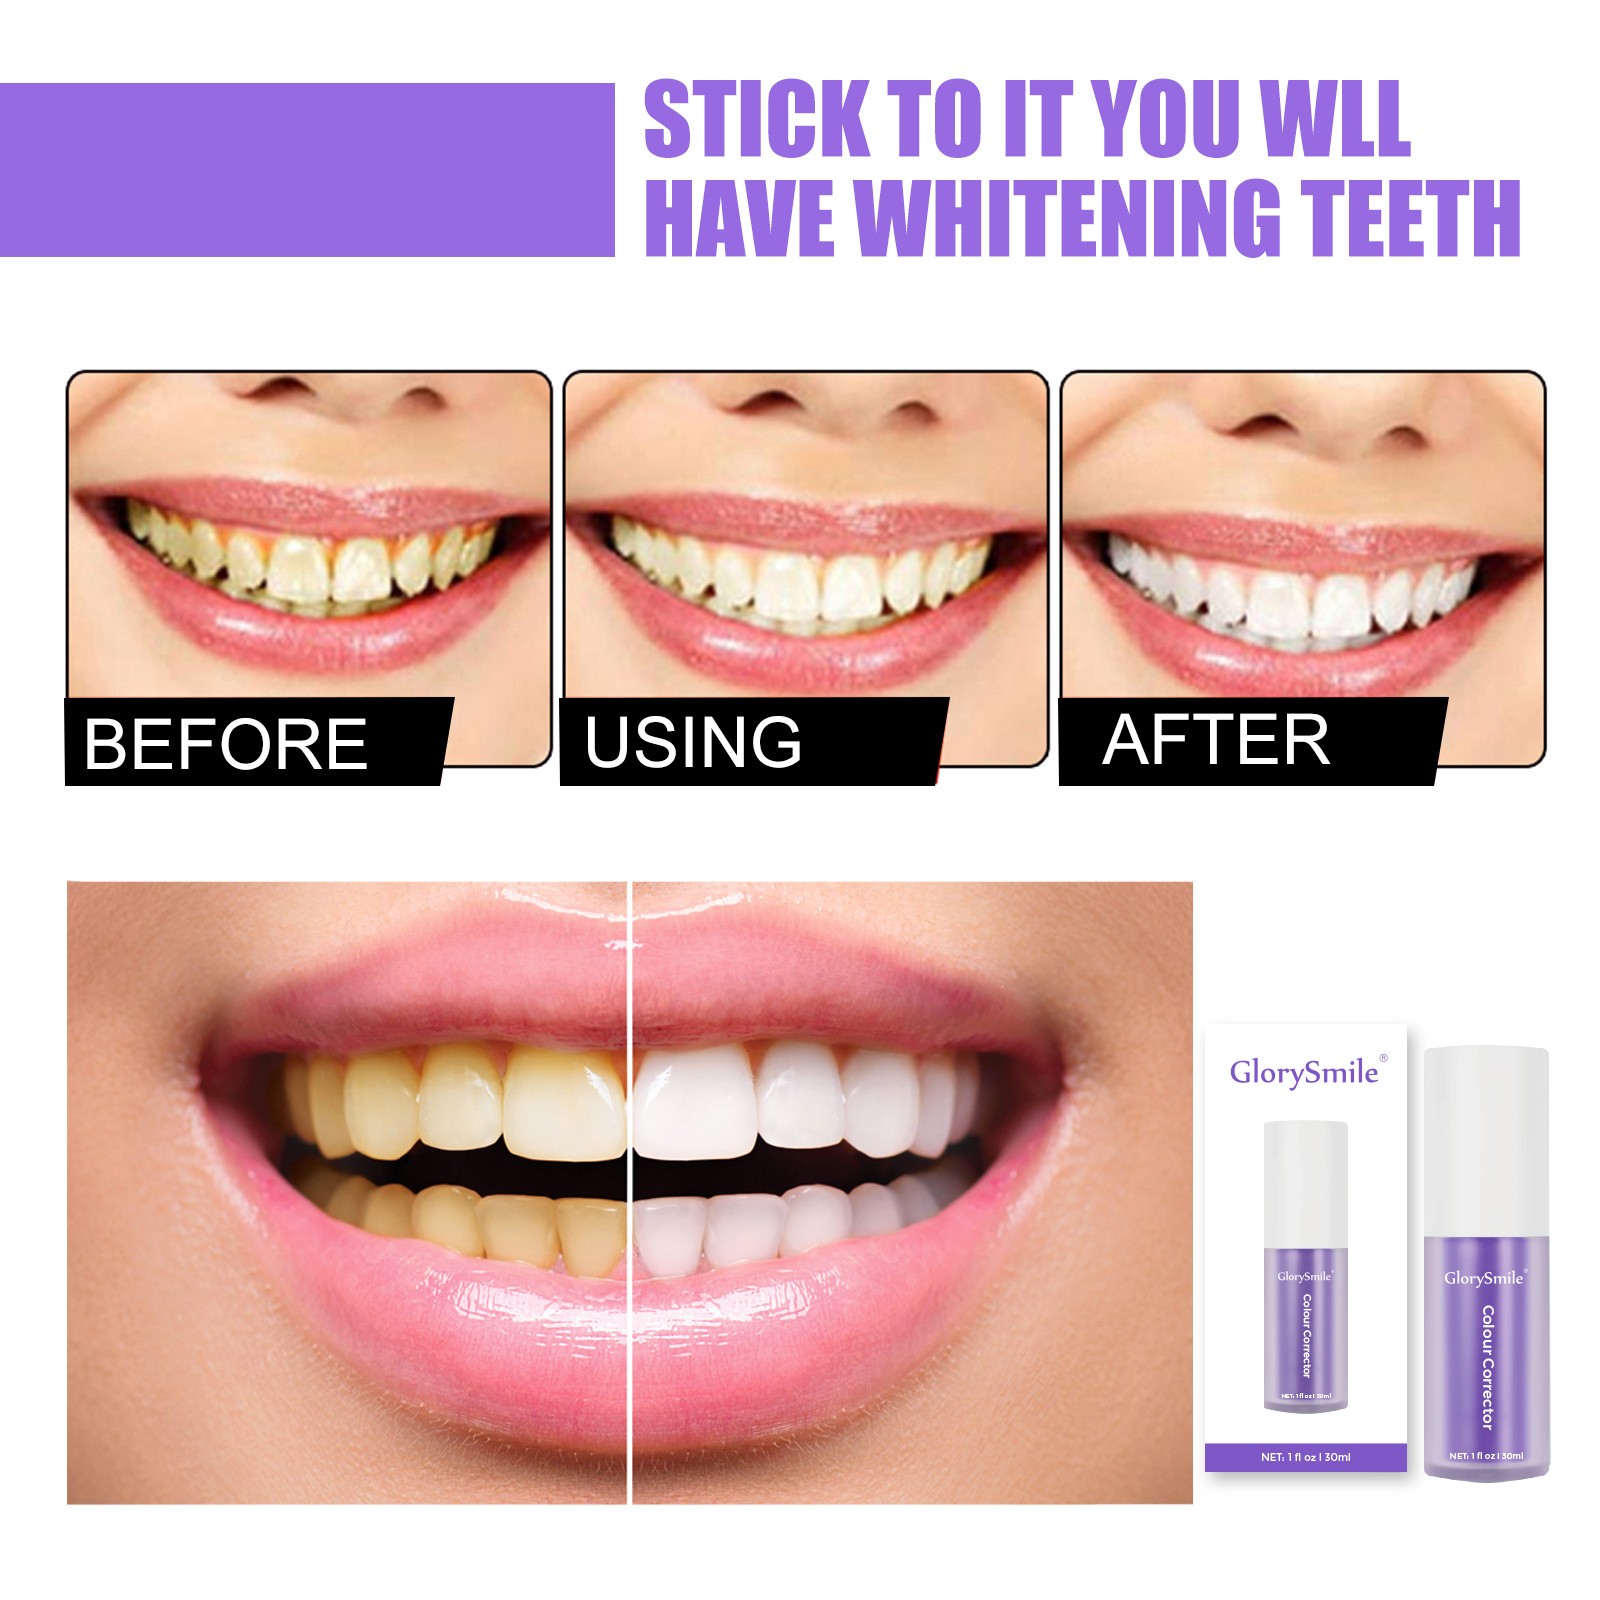 GlorySmile New mousse foam teeth whitening inquire now for whitening teeth-6